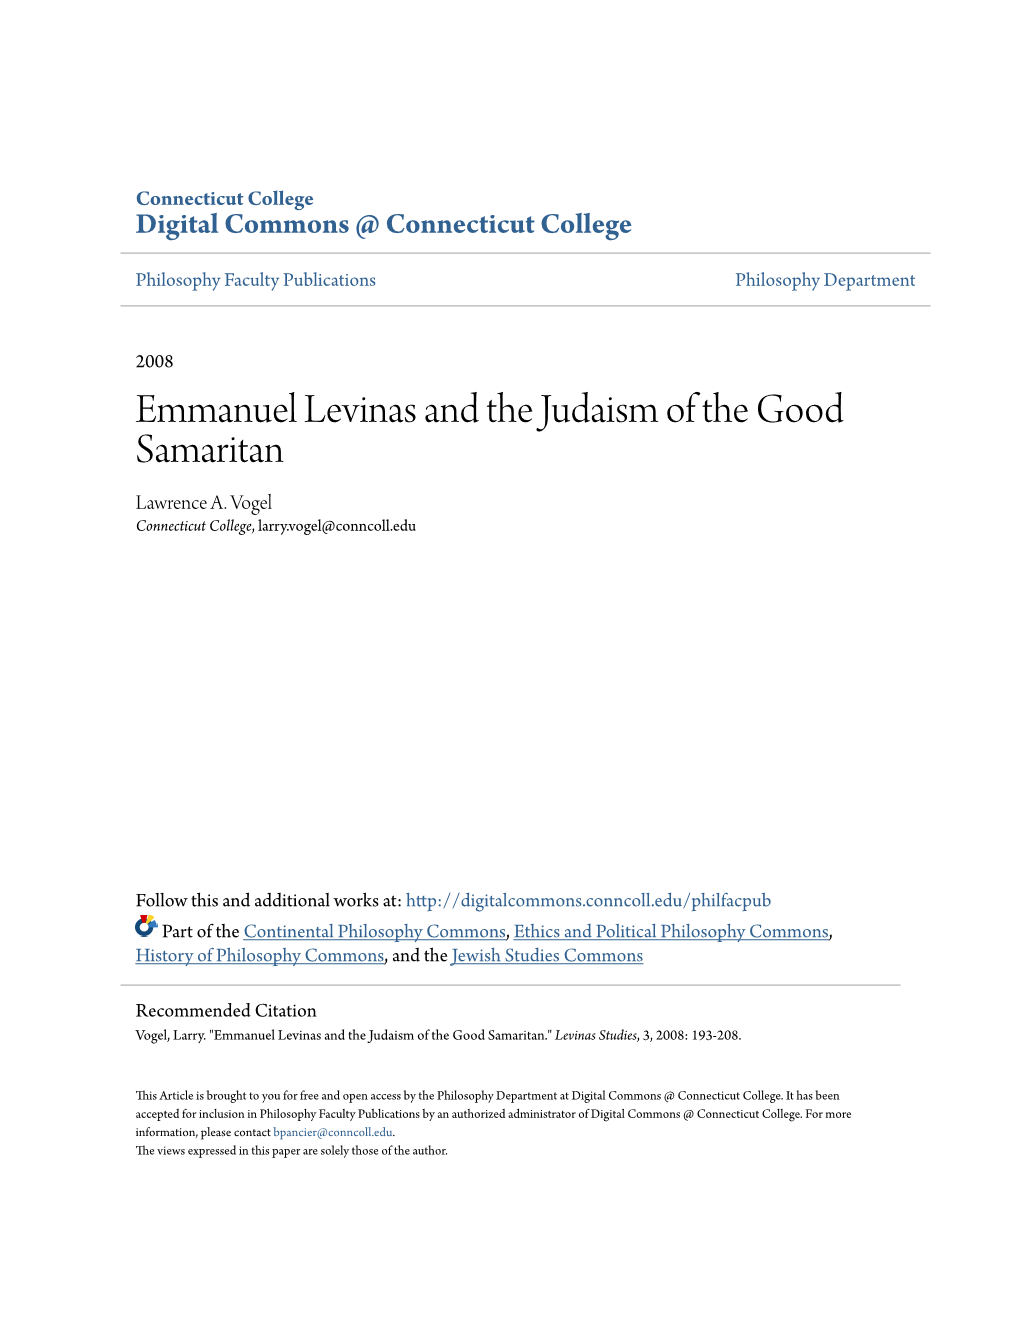 Emmanuel Levinas and the Judaism of the Good Samaritan Lawrence A